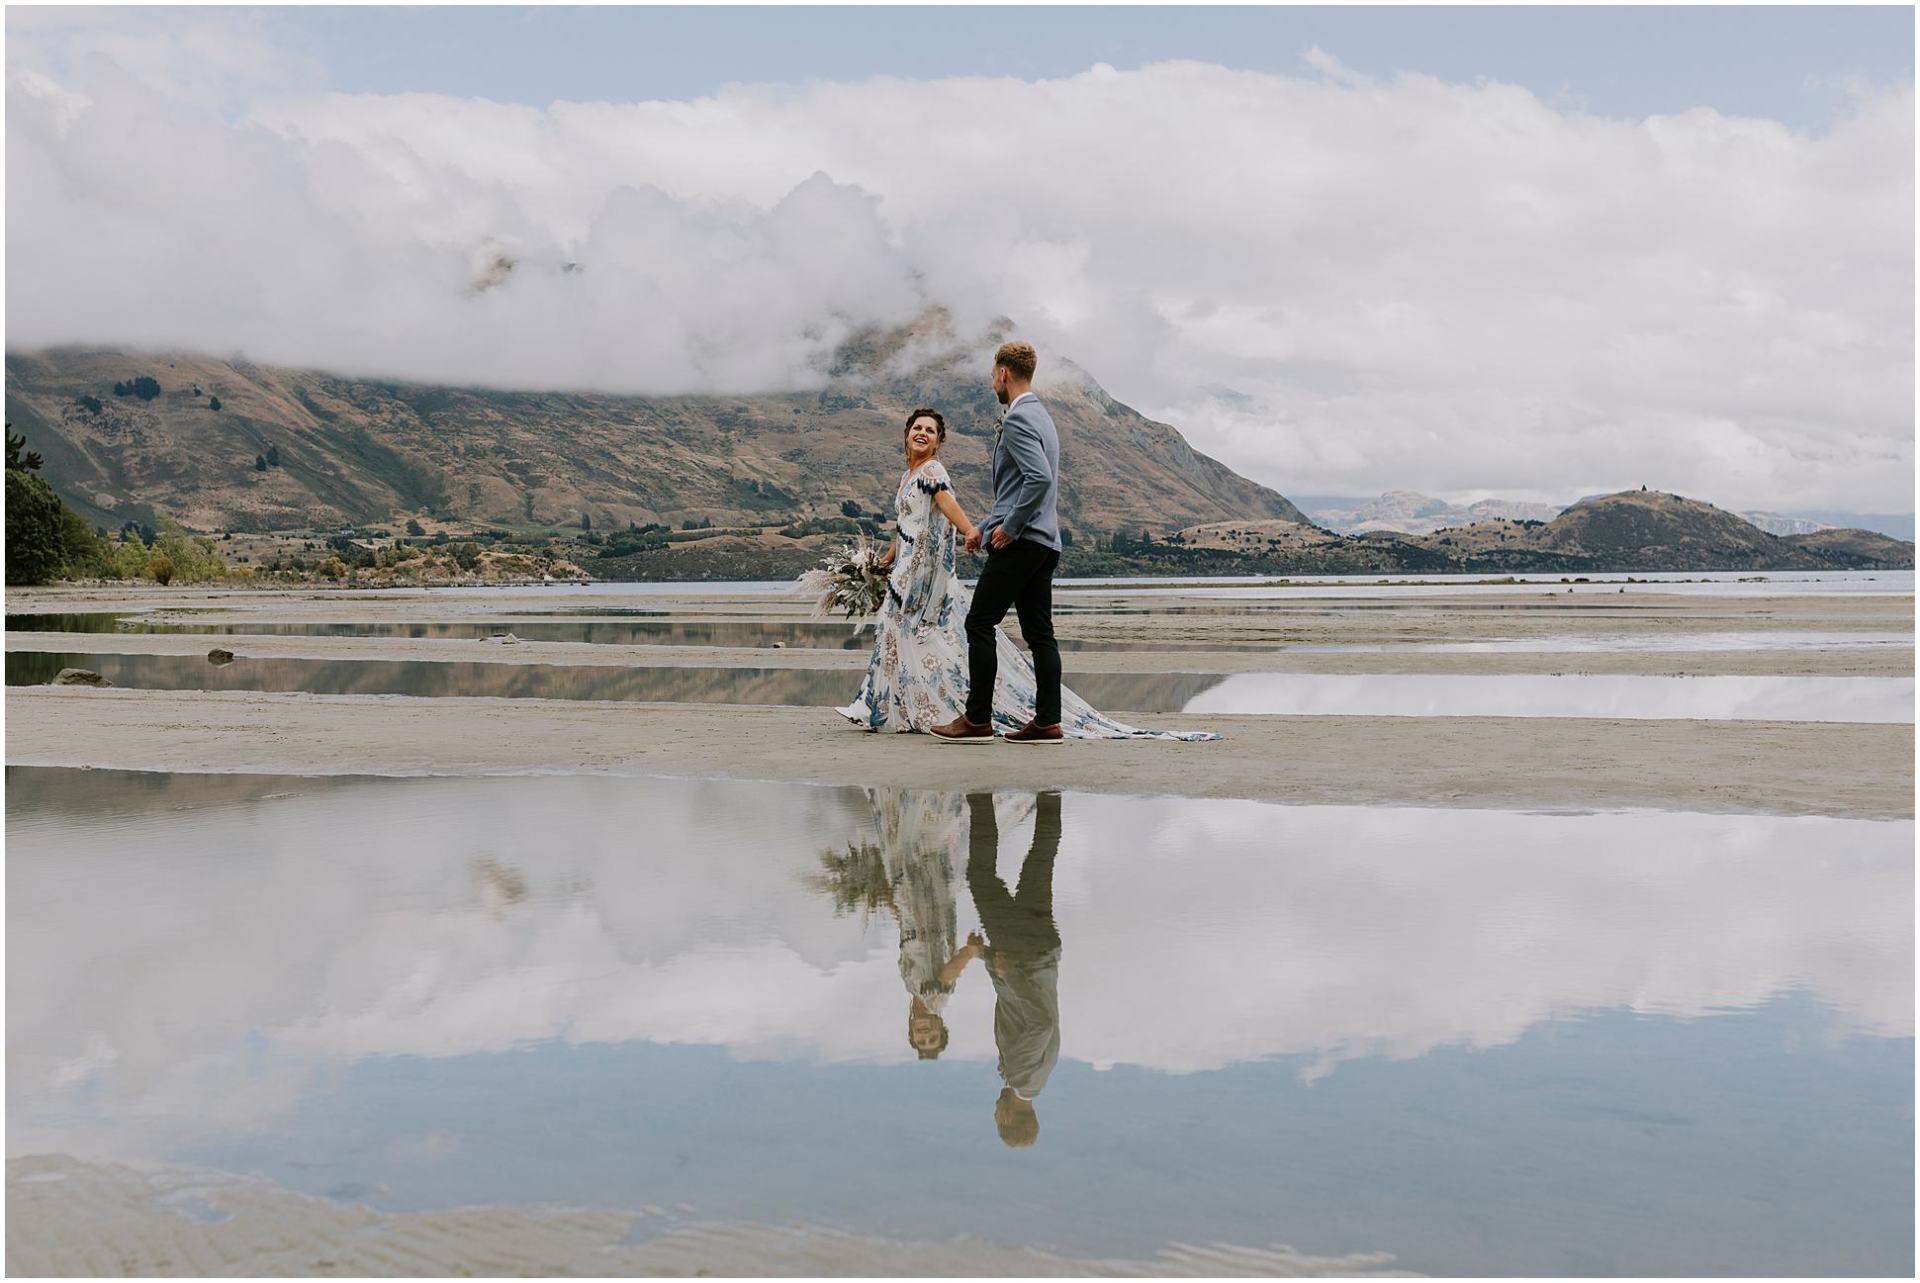 Charlotte Kiri Photography - Wedding Photography of a bride wearing a lovely blue floral dress with tasseled sleeves, holding hands and walking with her groom who wears a stylish grey jacket and black pants as they walk across a river bed near Coromandel Peak in Wanaka, New Zealand